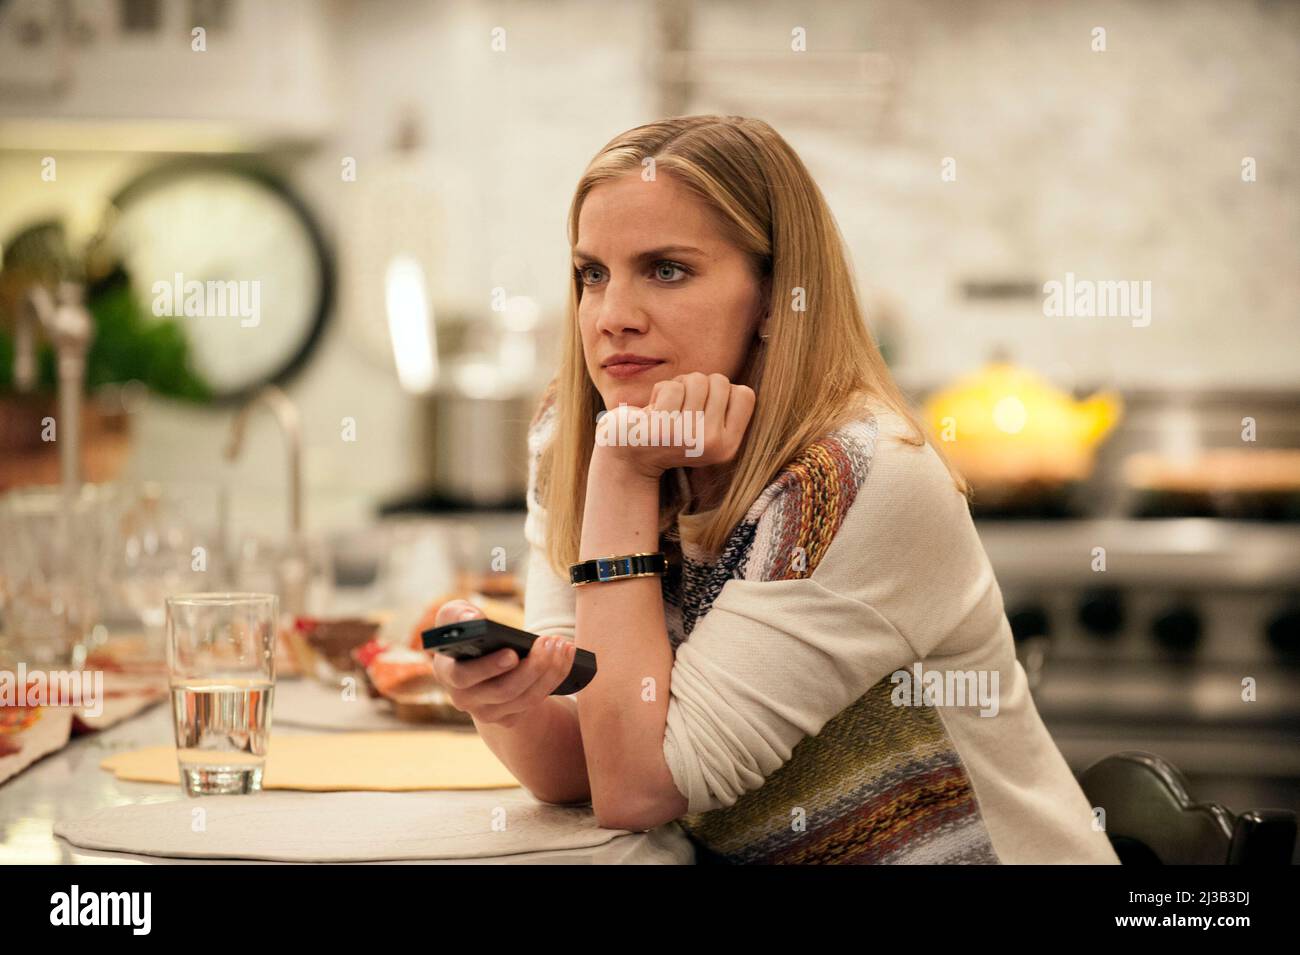 ANNA CHLUMSKY in VEEP (2012), directed by ARMANDO IANNUCCI. Credit: HBO / Album Stock Photo